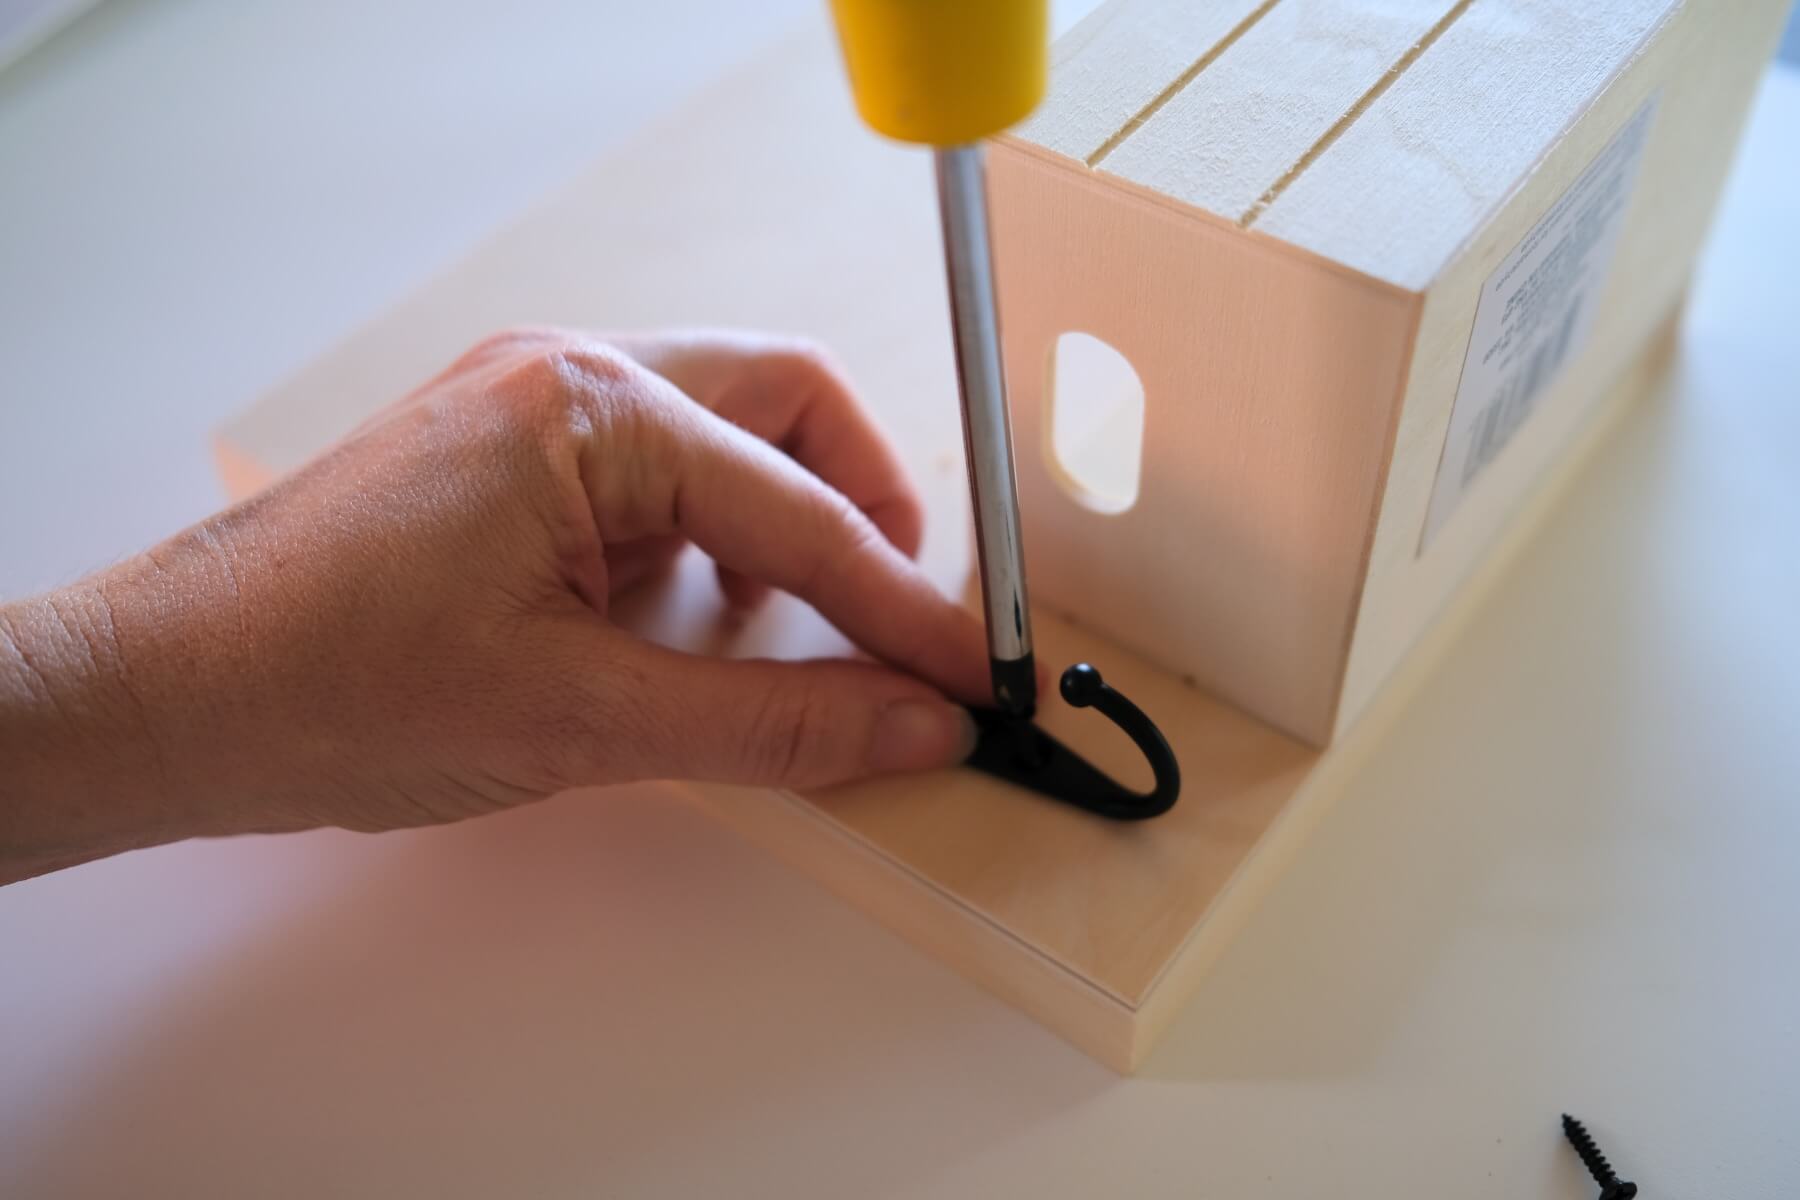 attach the key hook to the wood frame diy